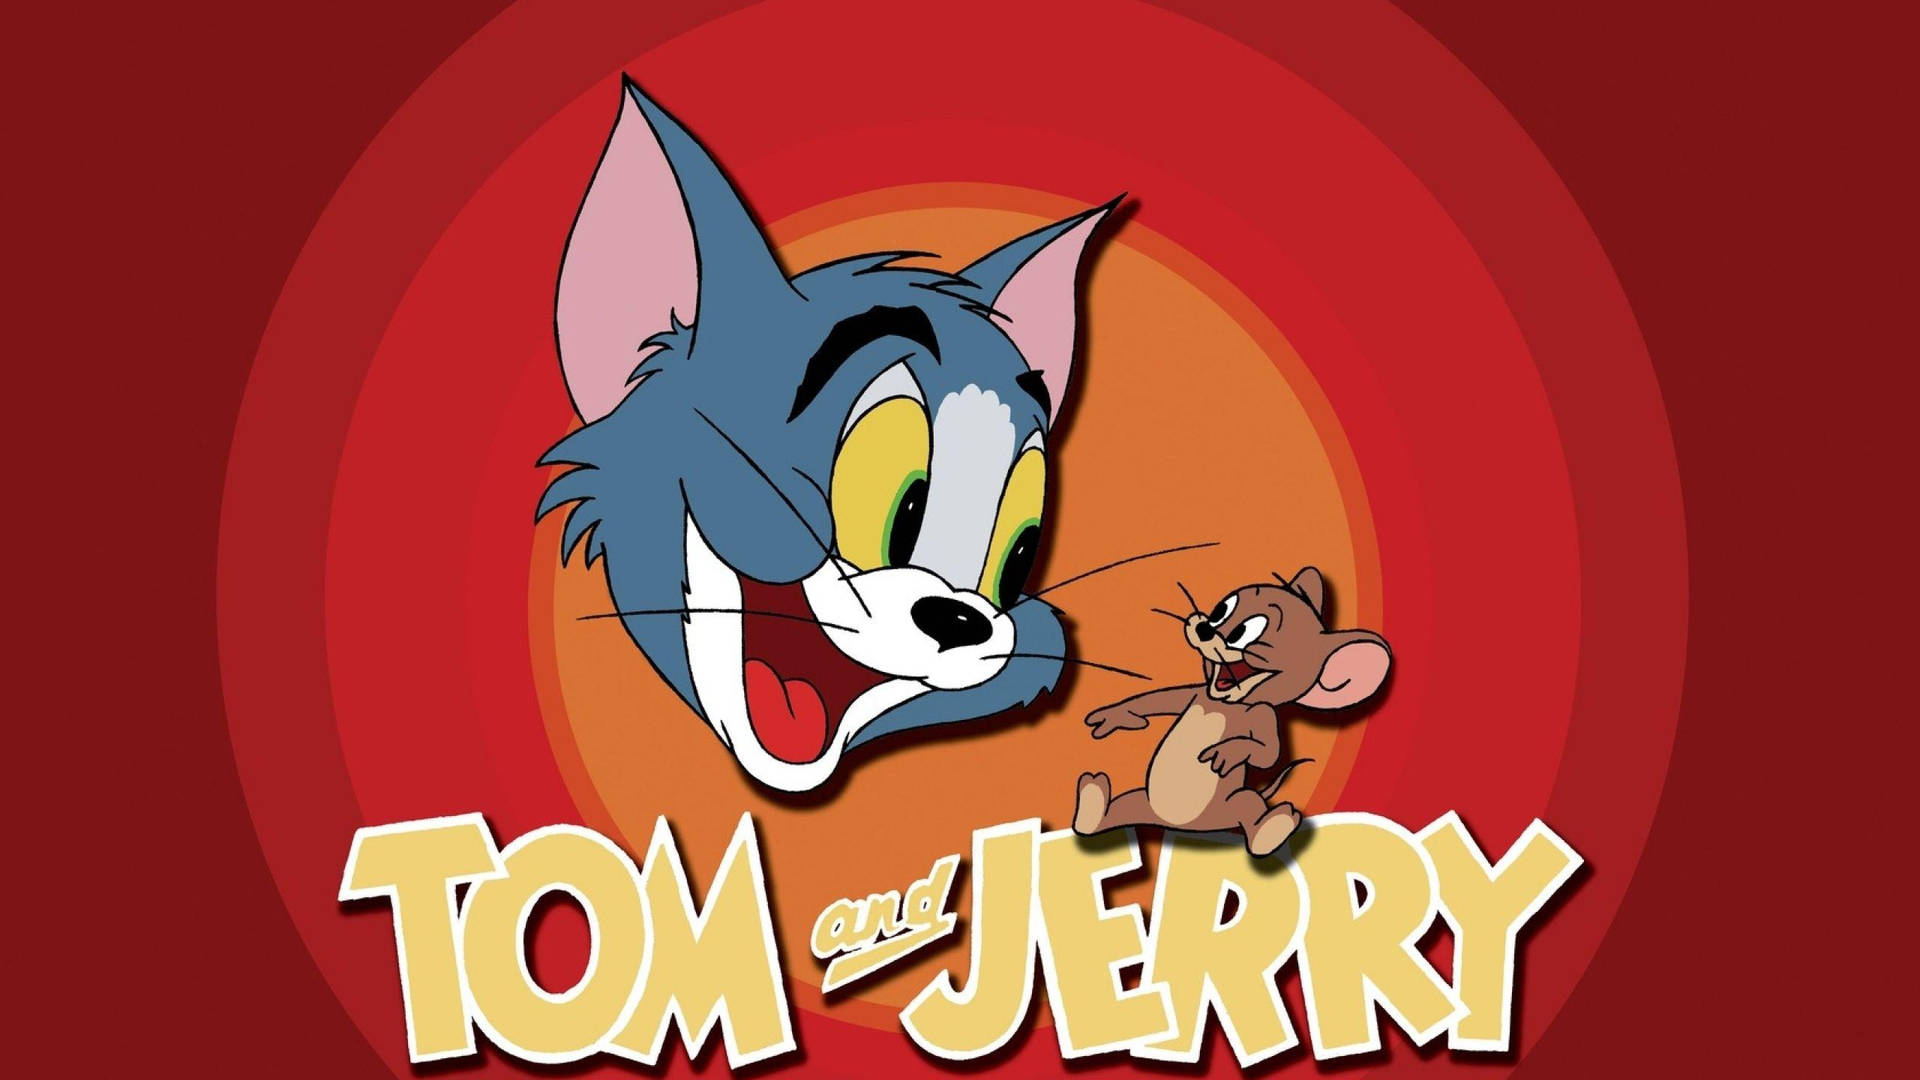 Digital Poster Of Tom Cat And Jerry Background